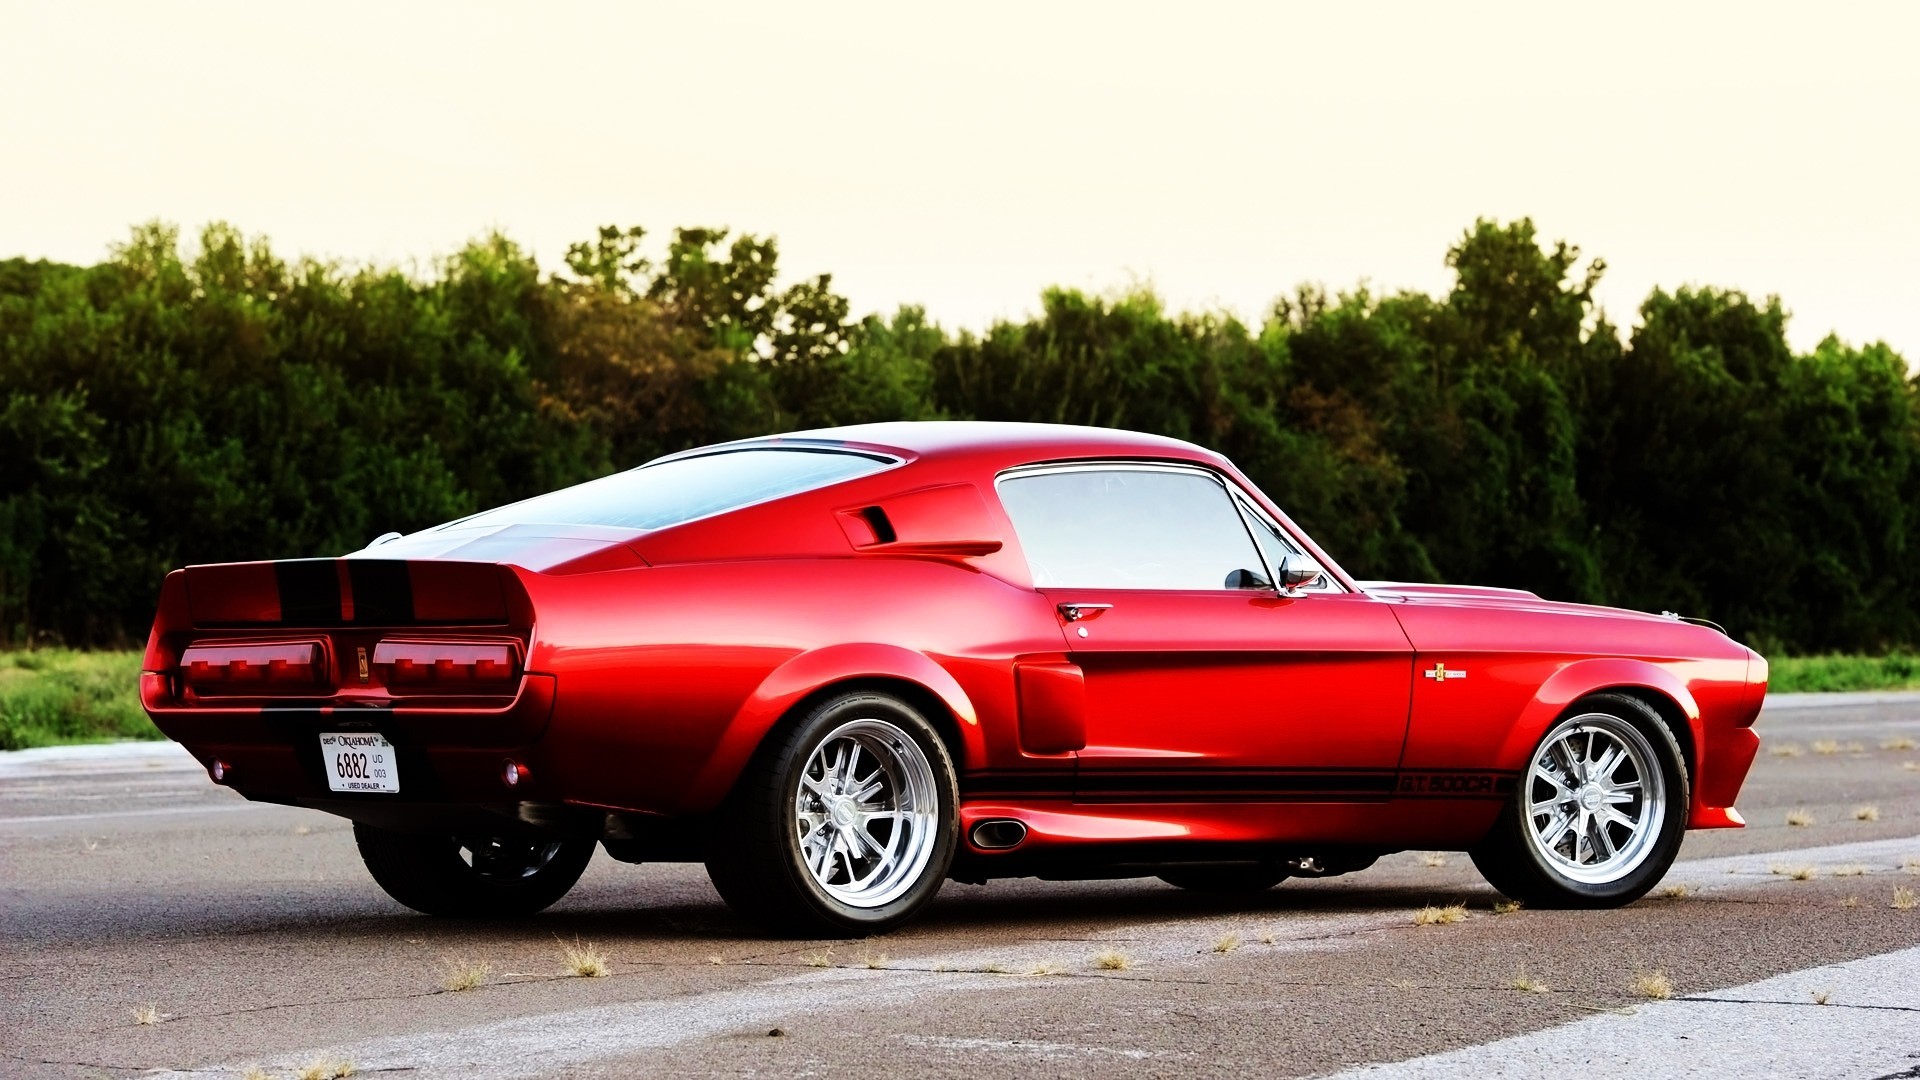 1920x1080 Muscle Car Wallpapers